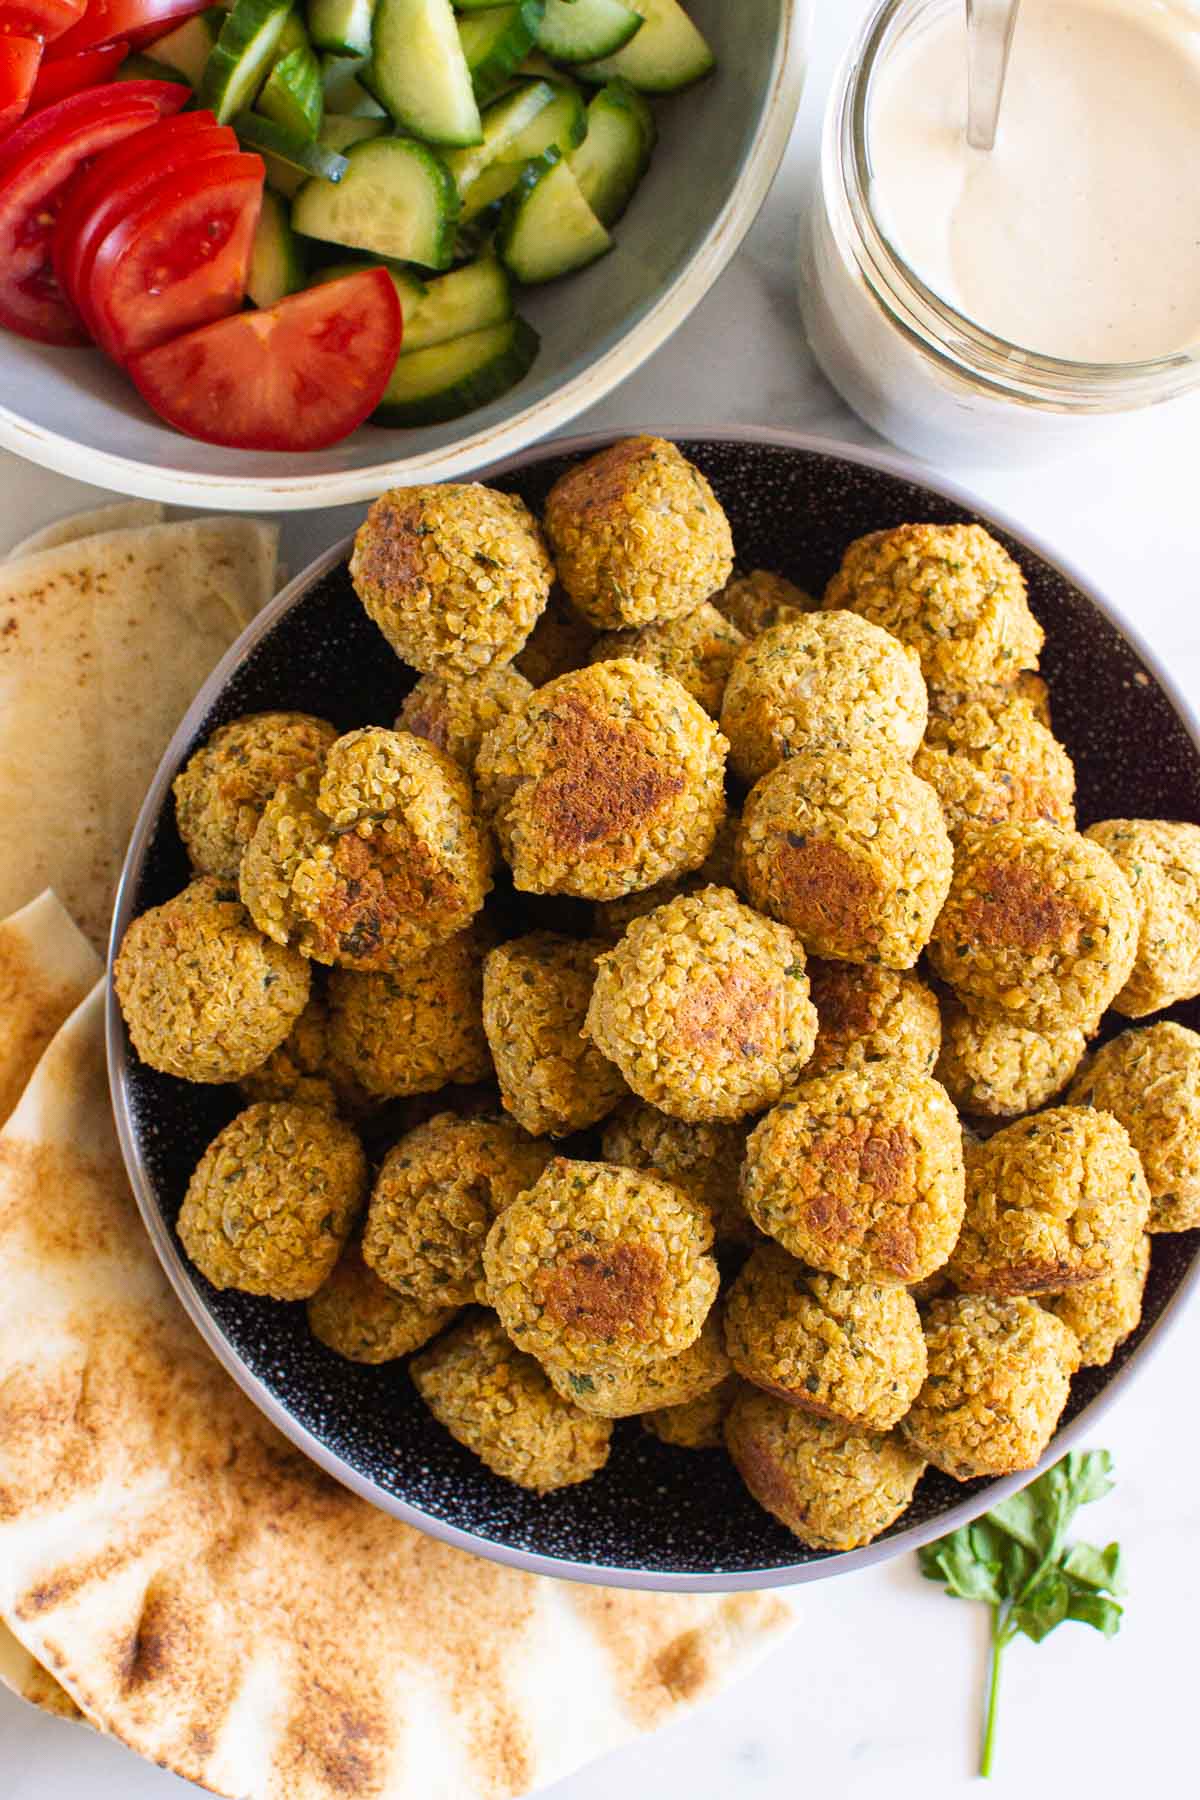 chickpea quinoa falafel piled in a bowl sauce and pita sandwich items